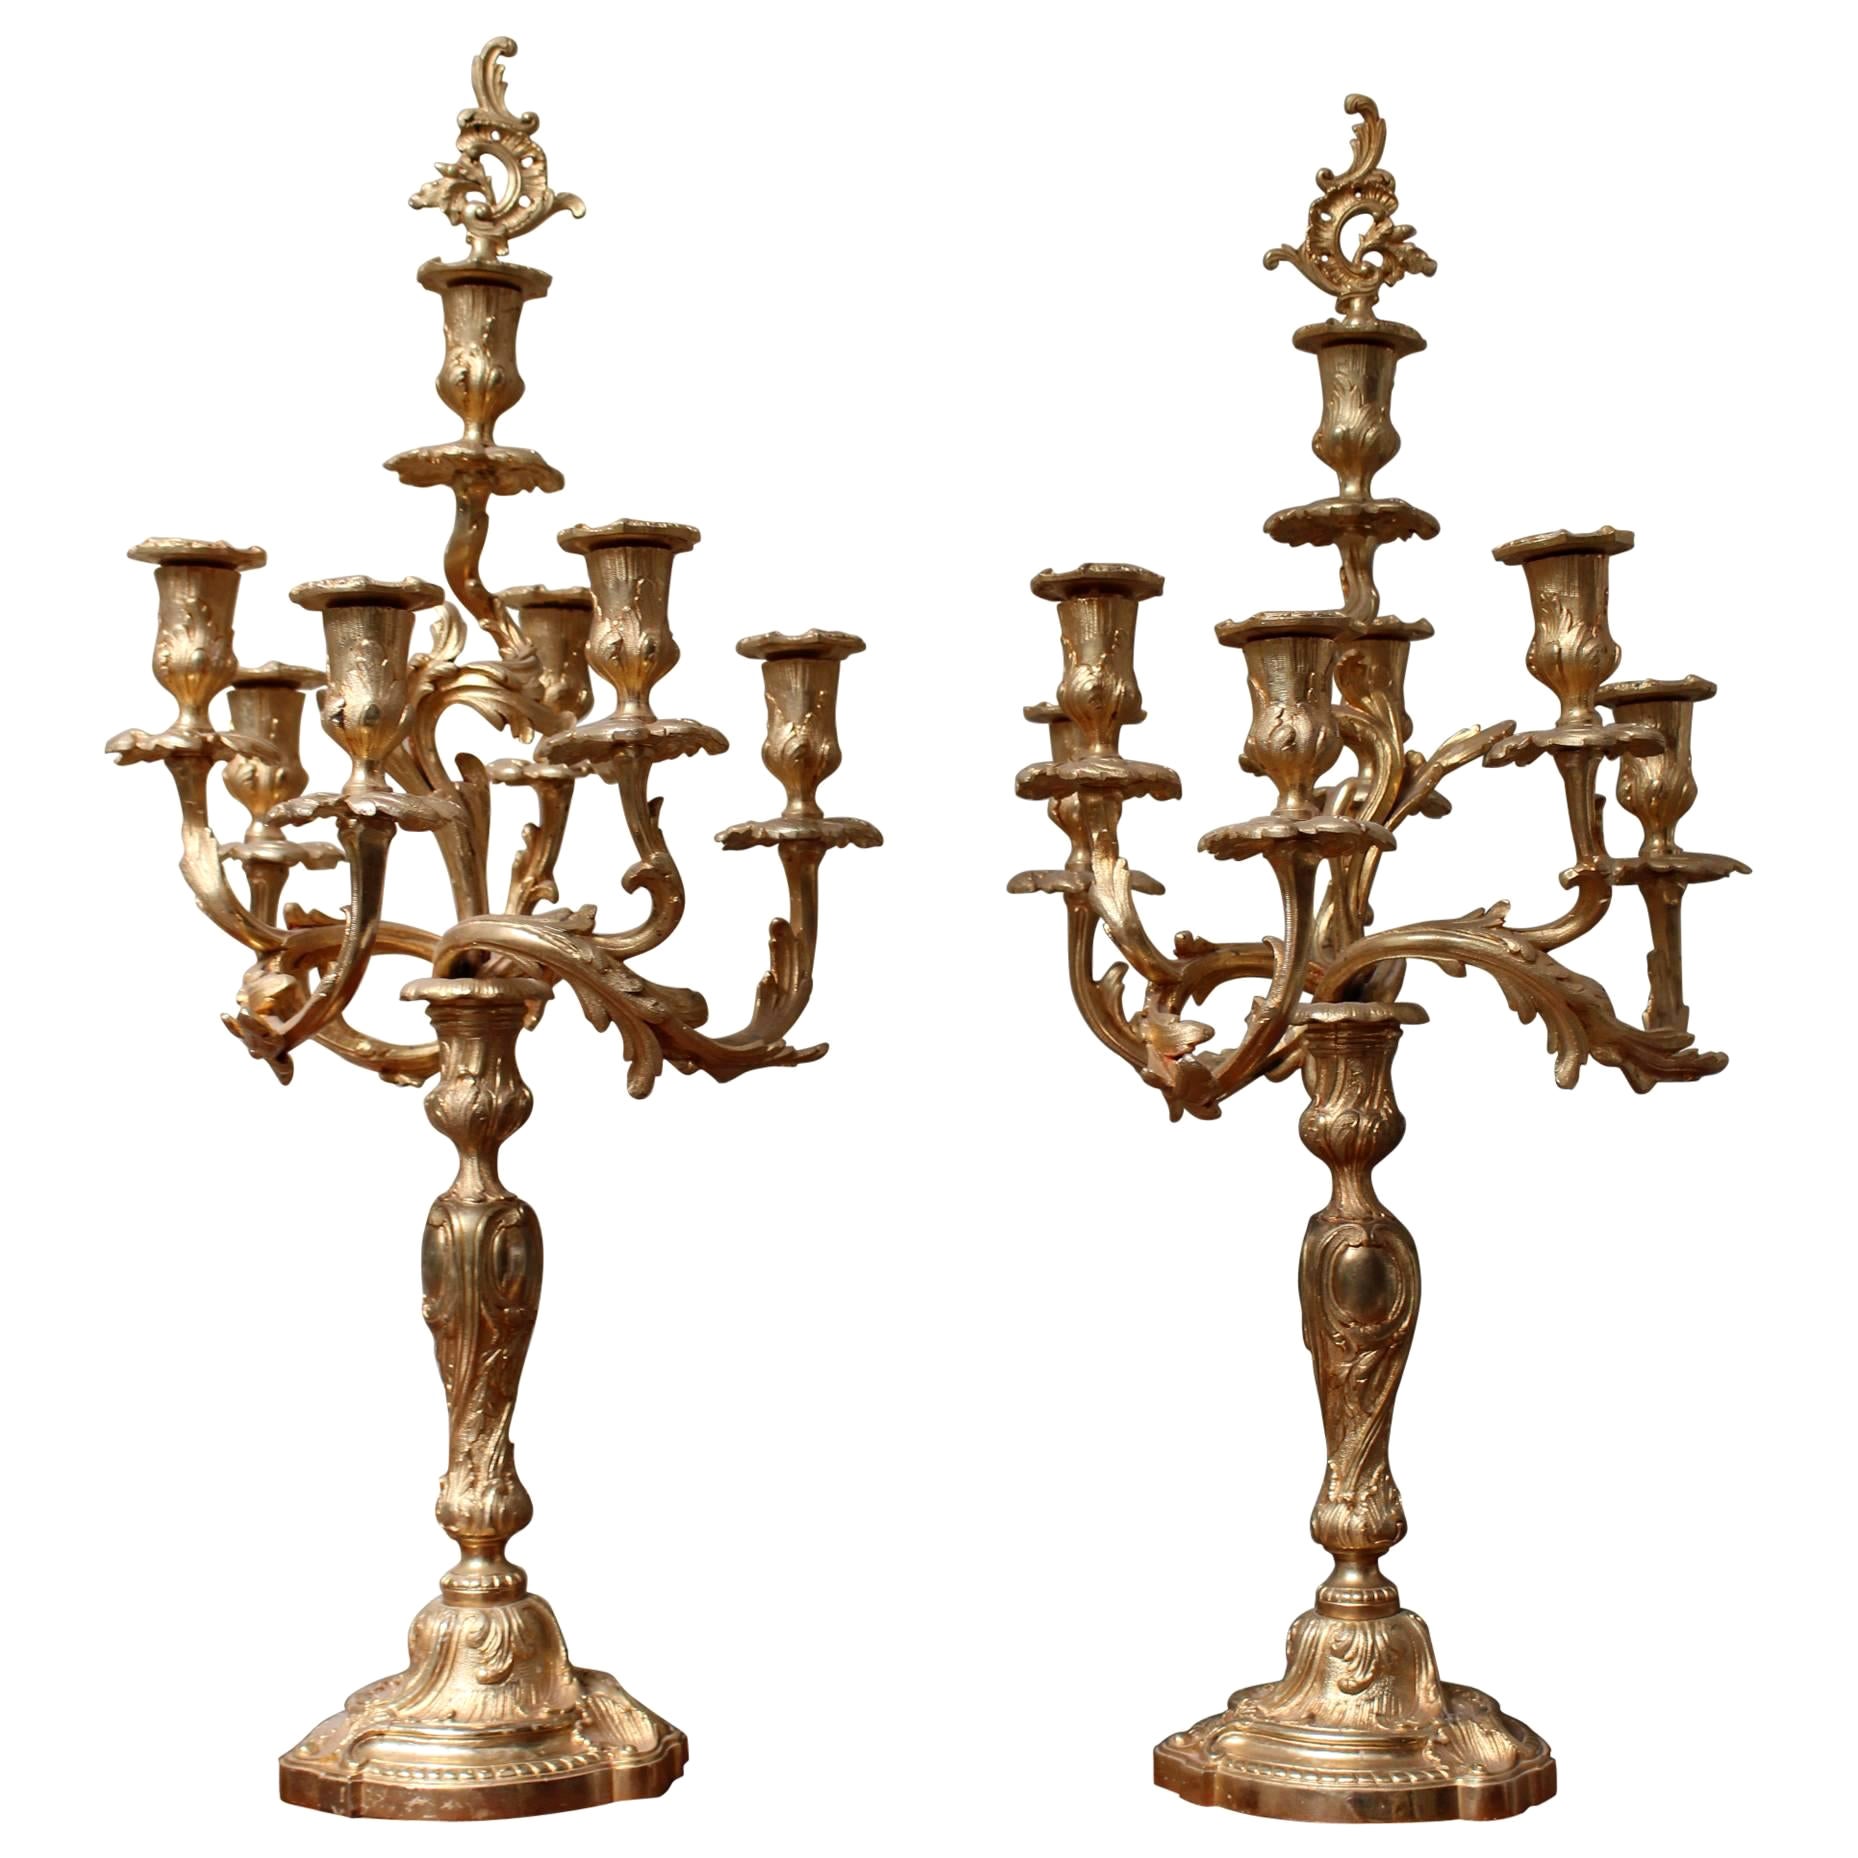 Pair of Large 19th Century Gold French Louis XV Style Gilded Bronze Candelabra